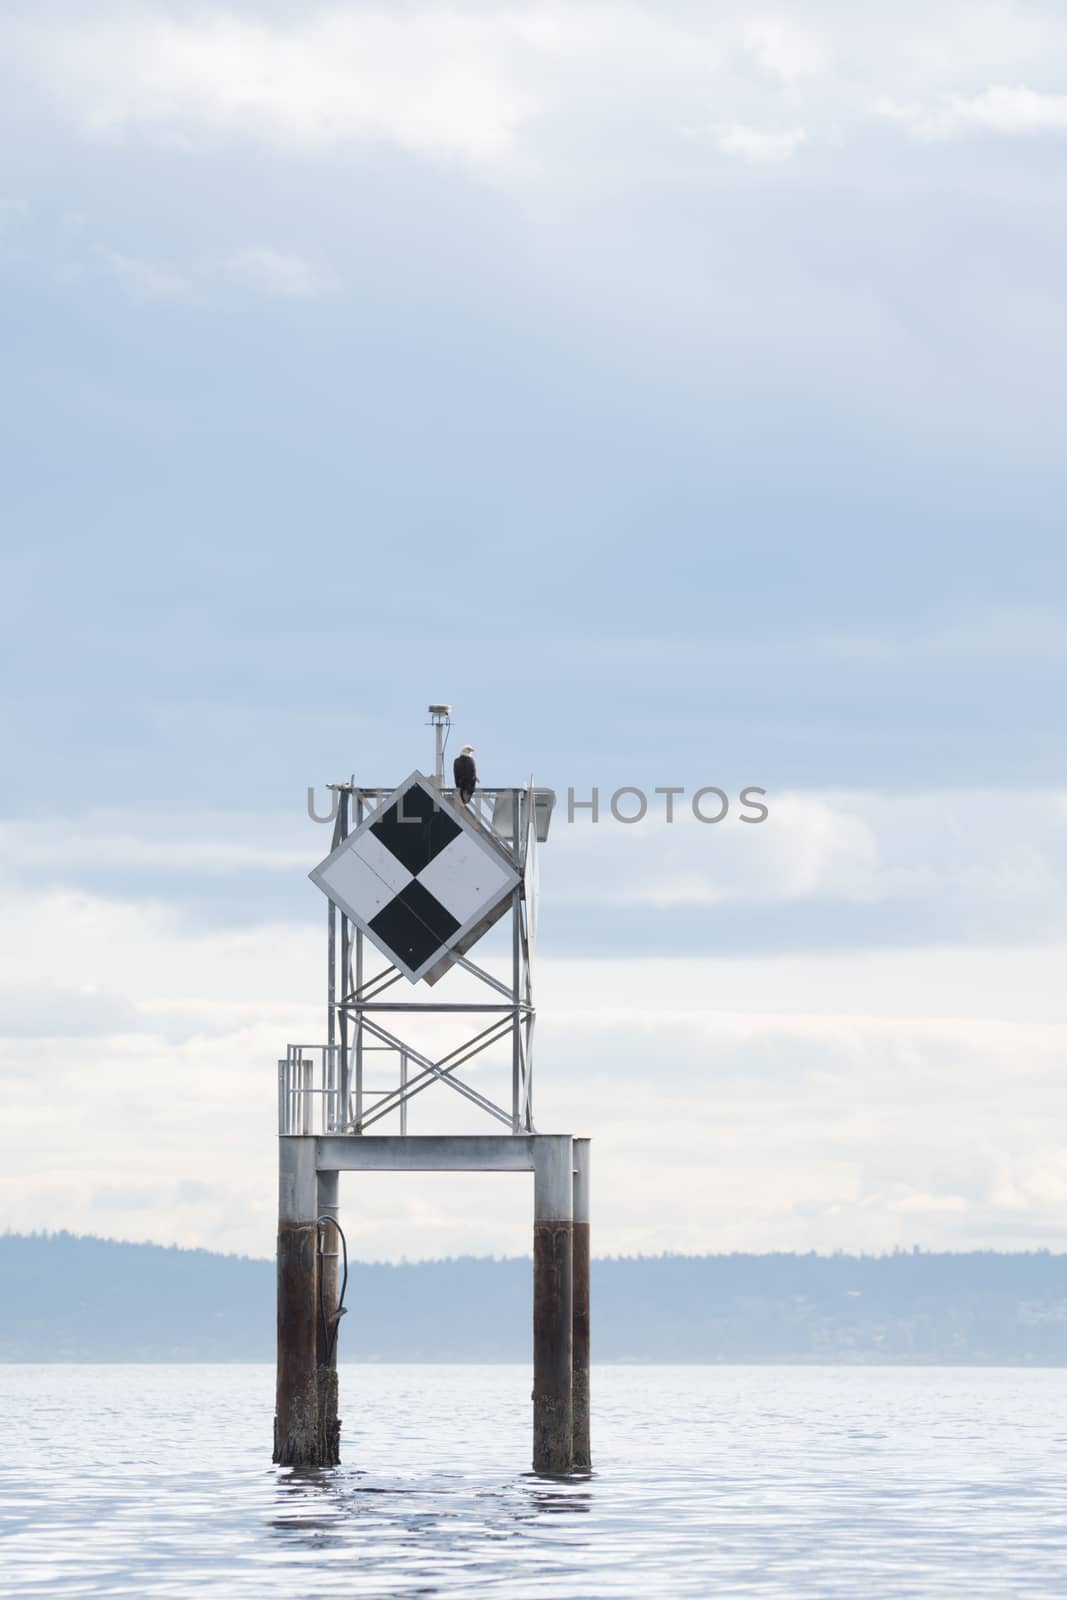 Eagle perched on Duwamish Head Daymark, Seattle, WA by cestes001